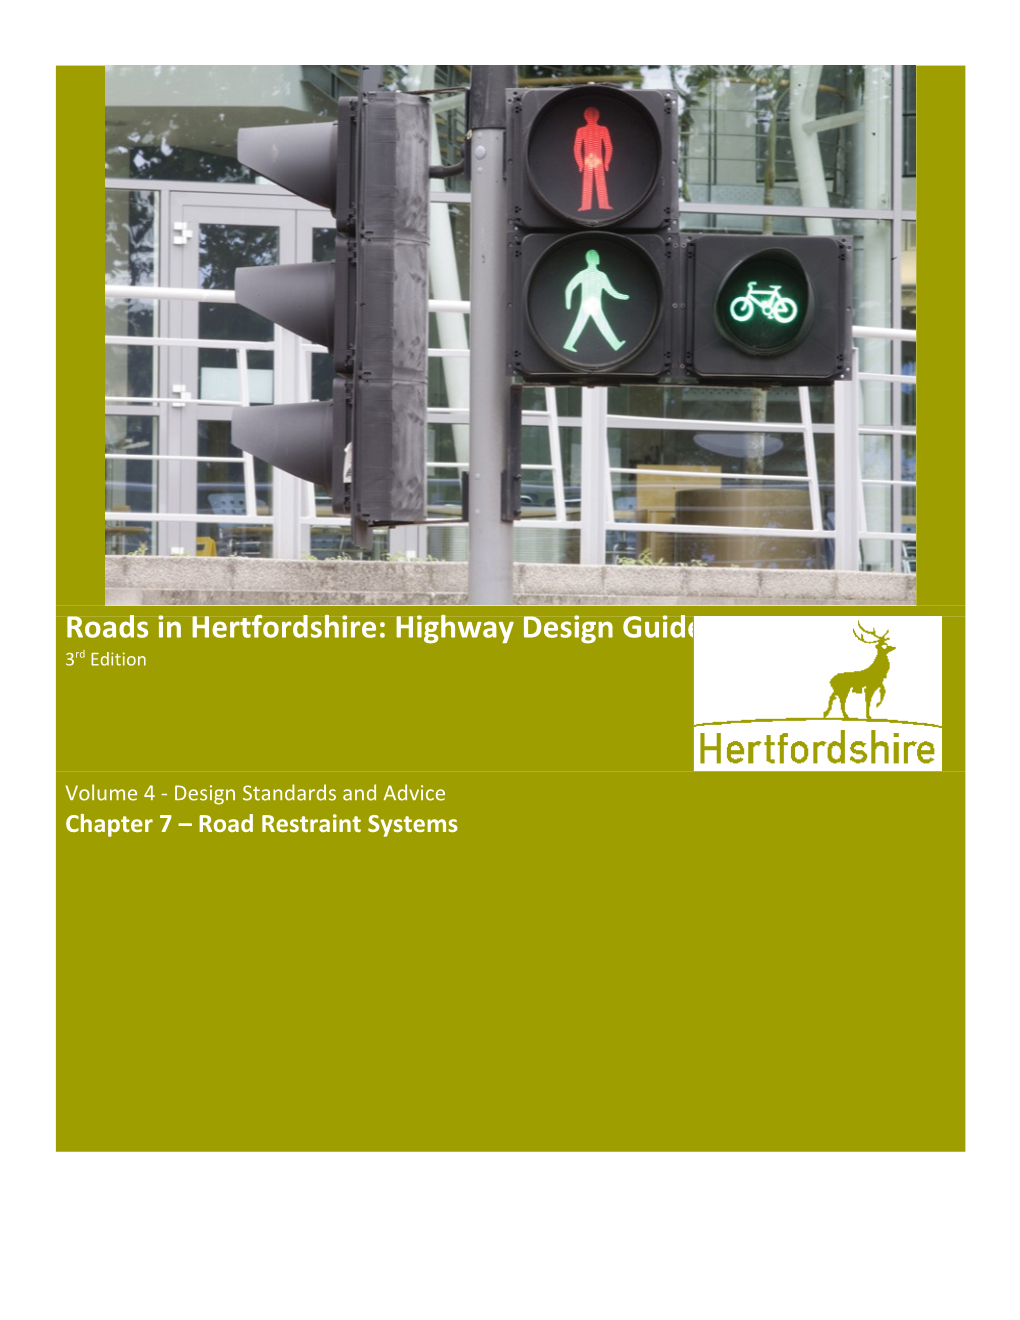 Roads in Hertfordshire 3Rd Edition Volume 3 Pre Consultation Draft 15 July 2010 for MRG s1